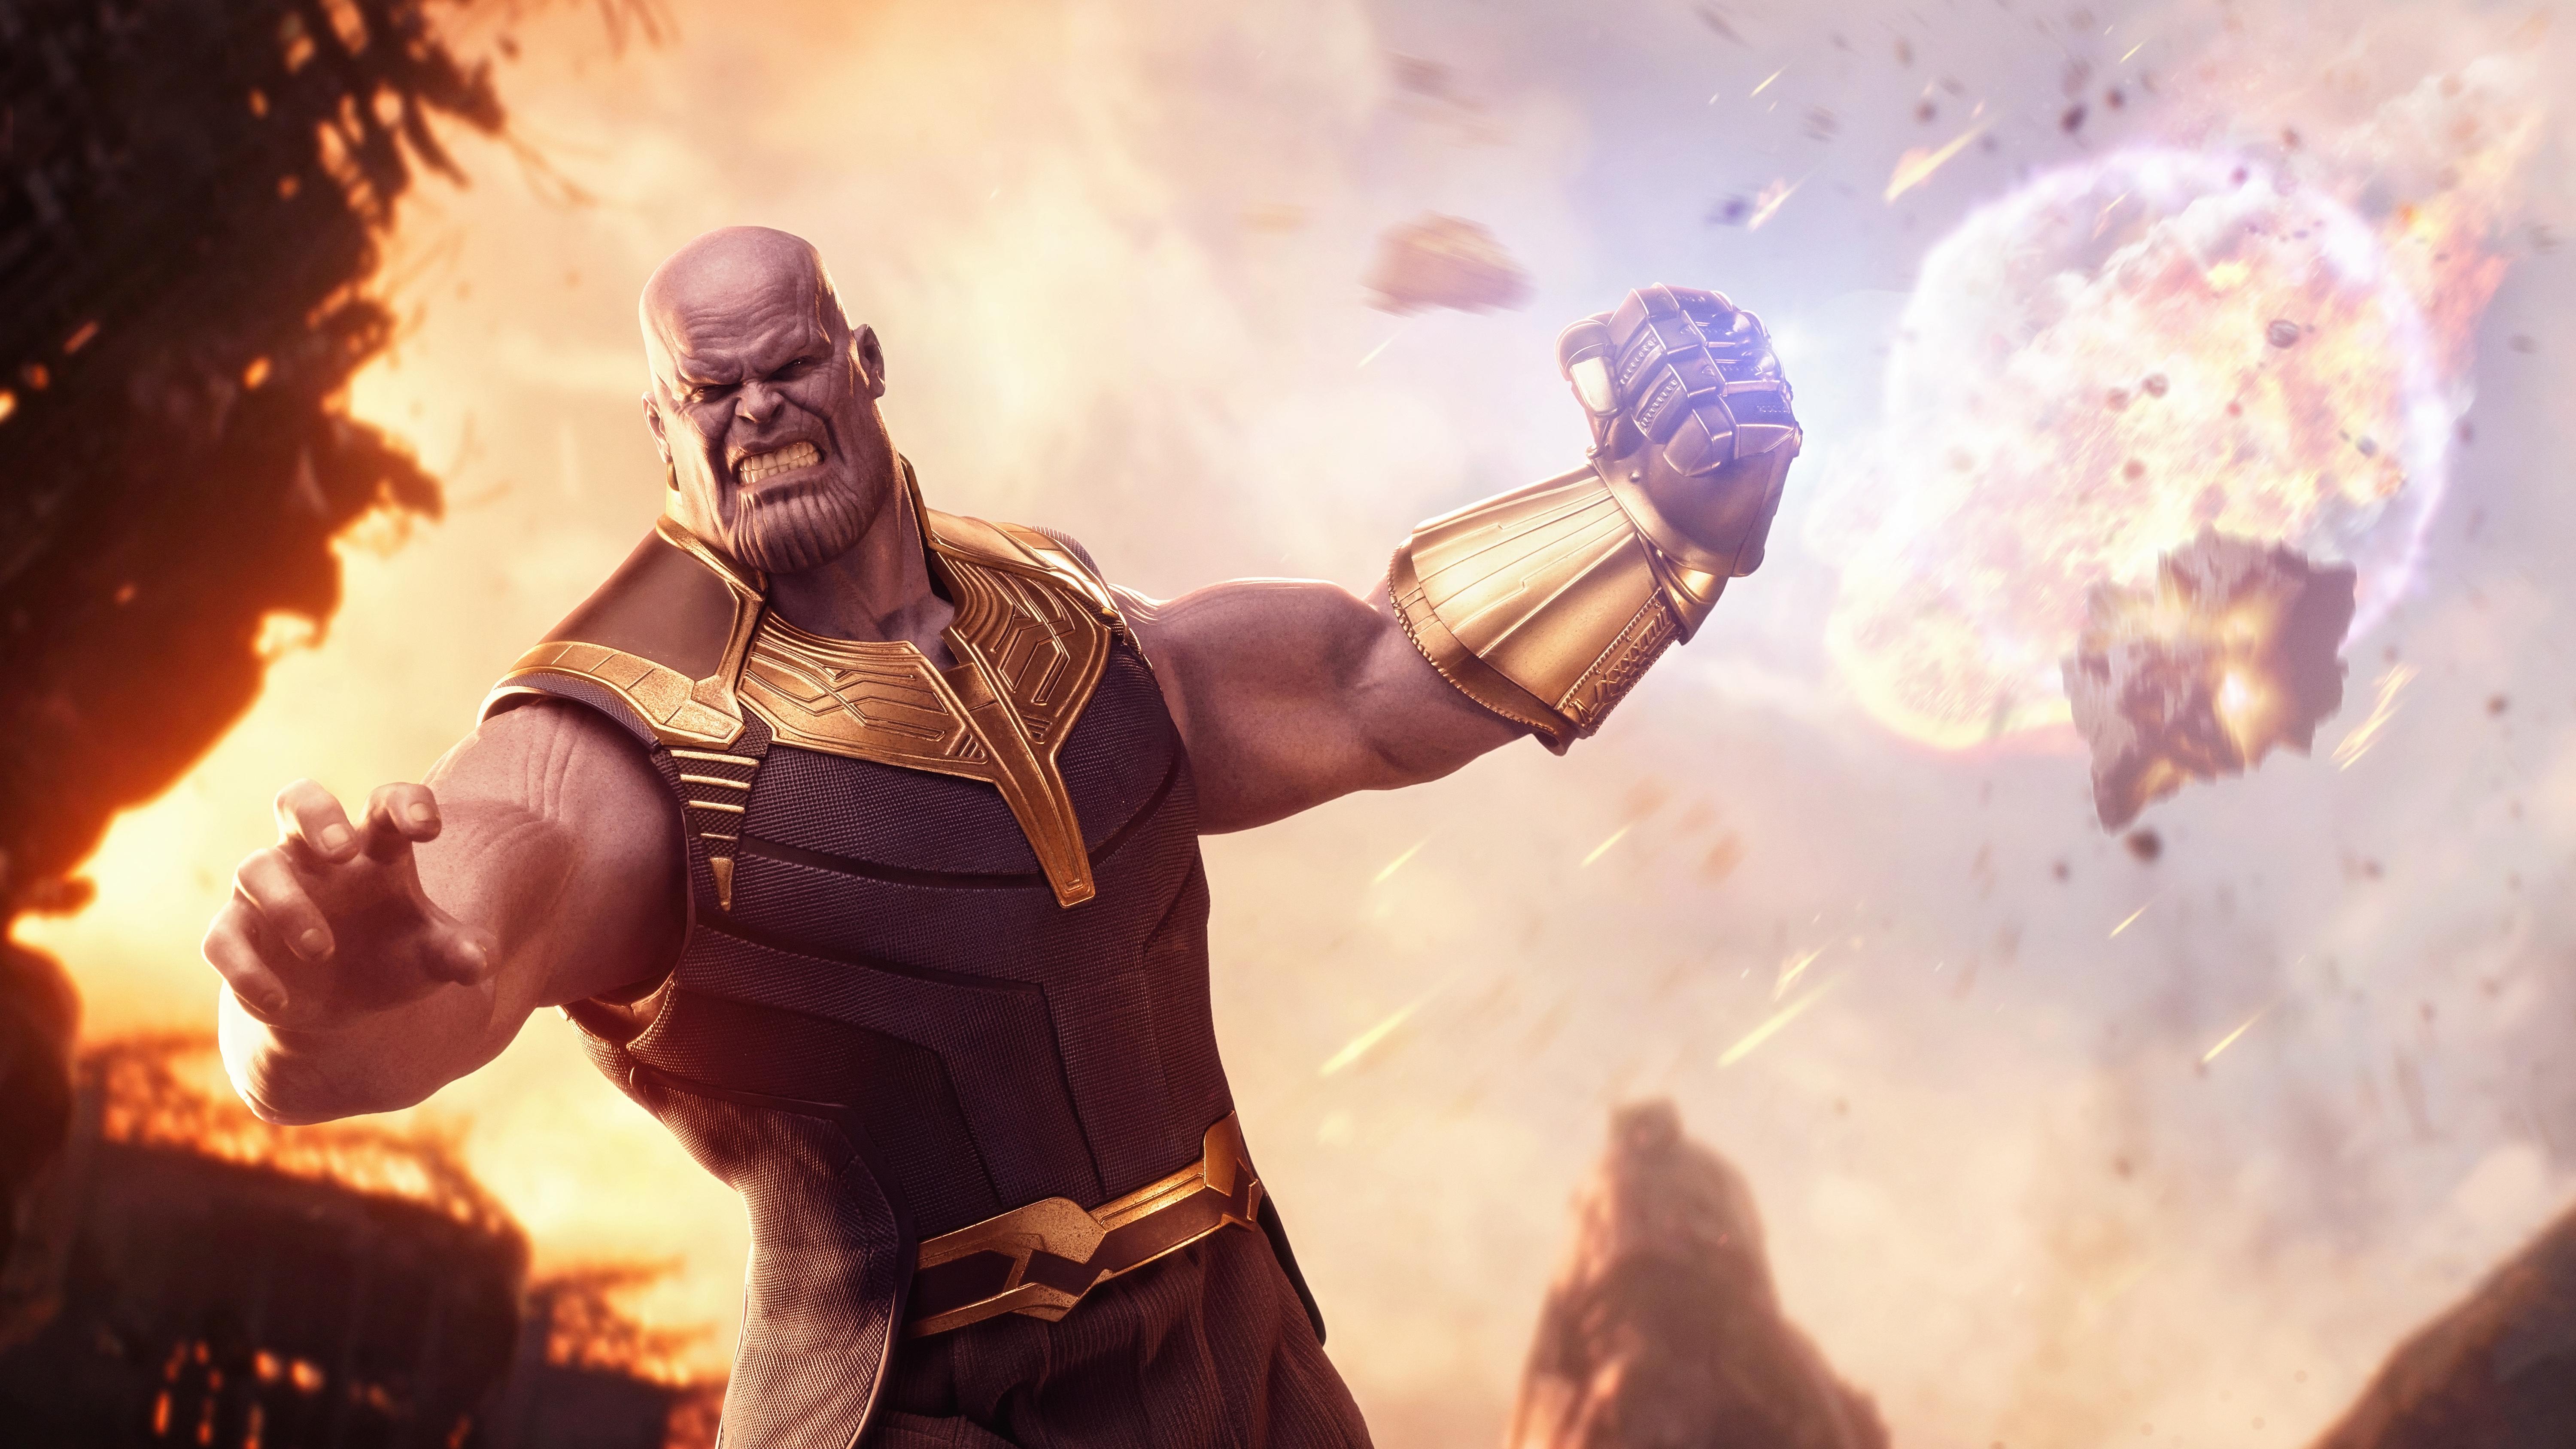 Wallpaper Thanos, Avengers: Infinity War, 4K, 5K, Movies,. Wallpaper for iPhone, Android, Mobile and Desktop